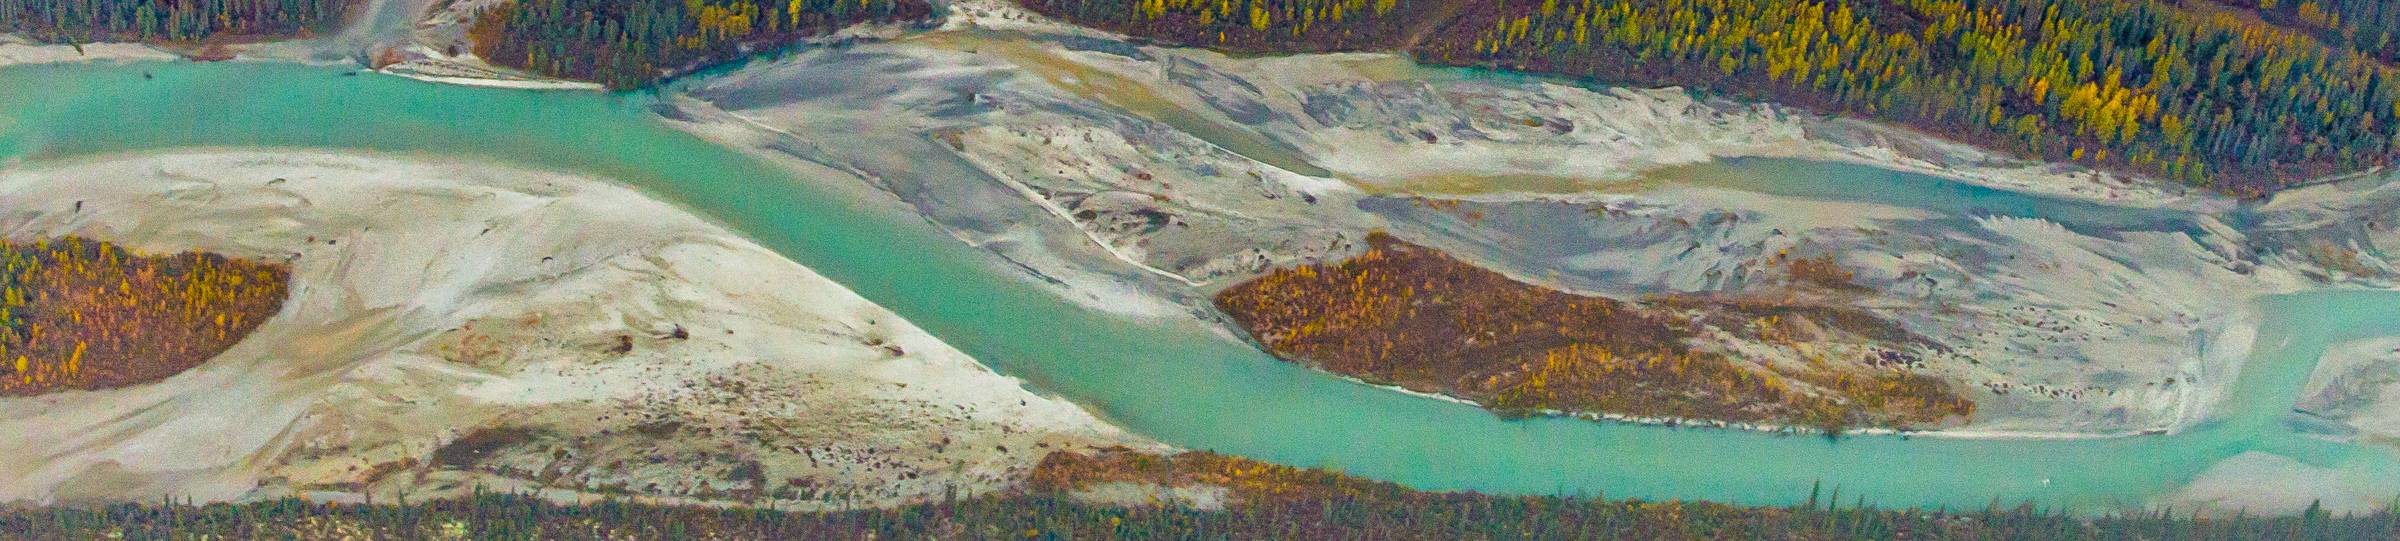 Landscape_river_from_above